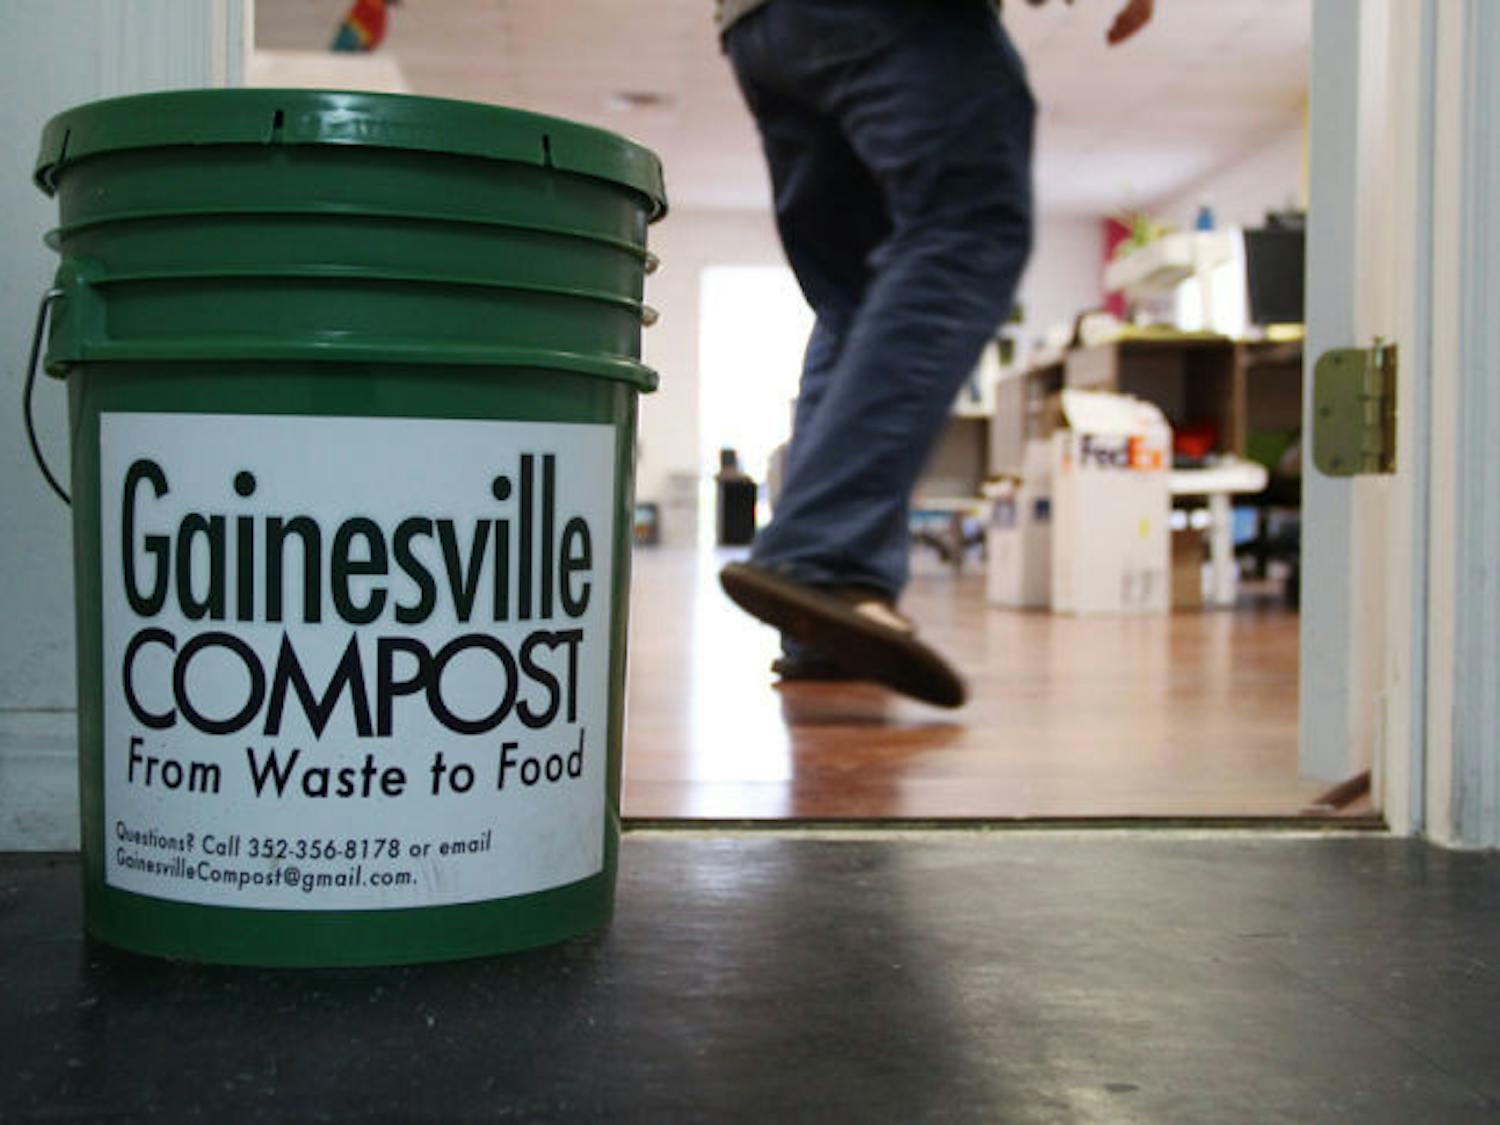 Gainesville Compost waste bins are located at Fracture among other locations. The company uses bicycle power instead of trucks to move waste to composting locations.&nbsp;